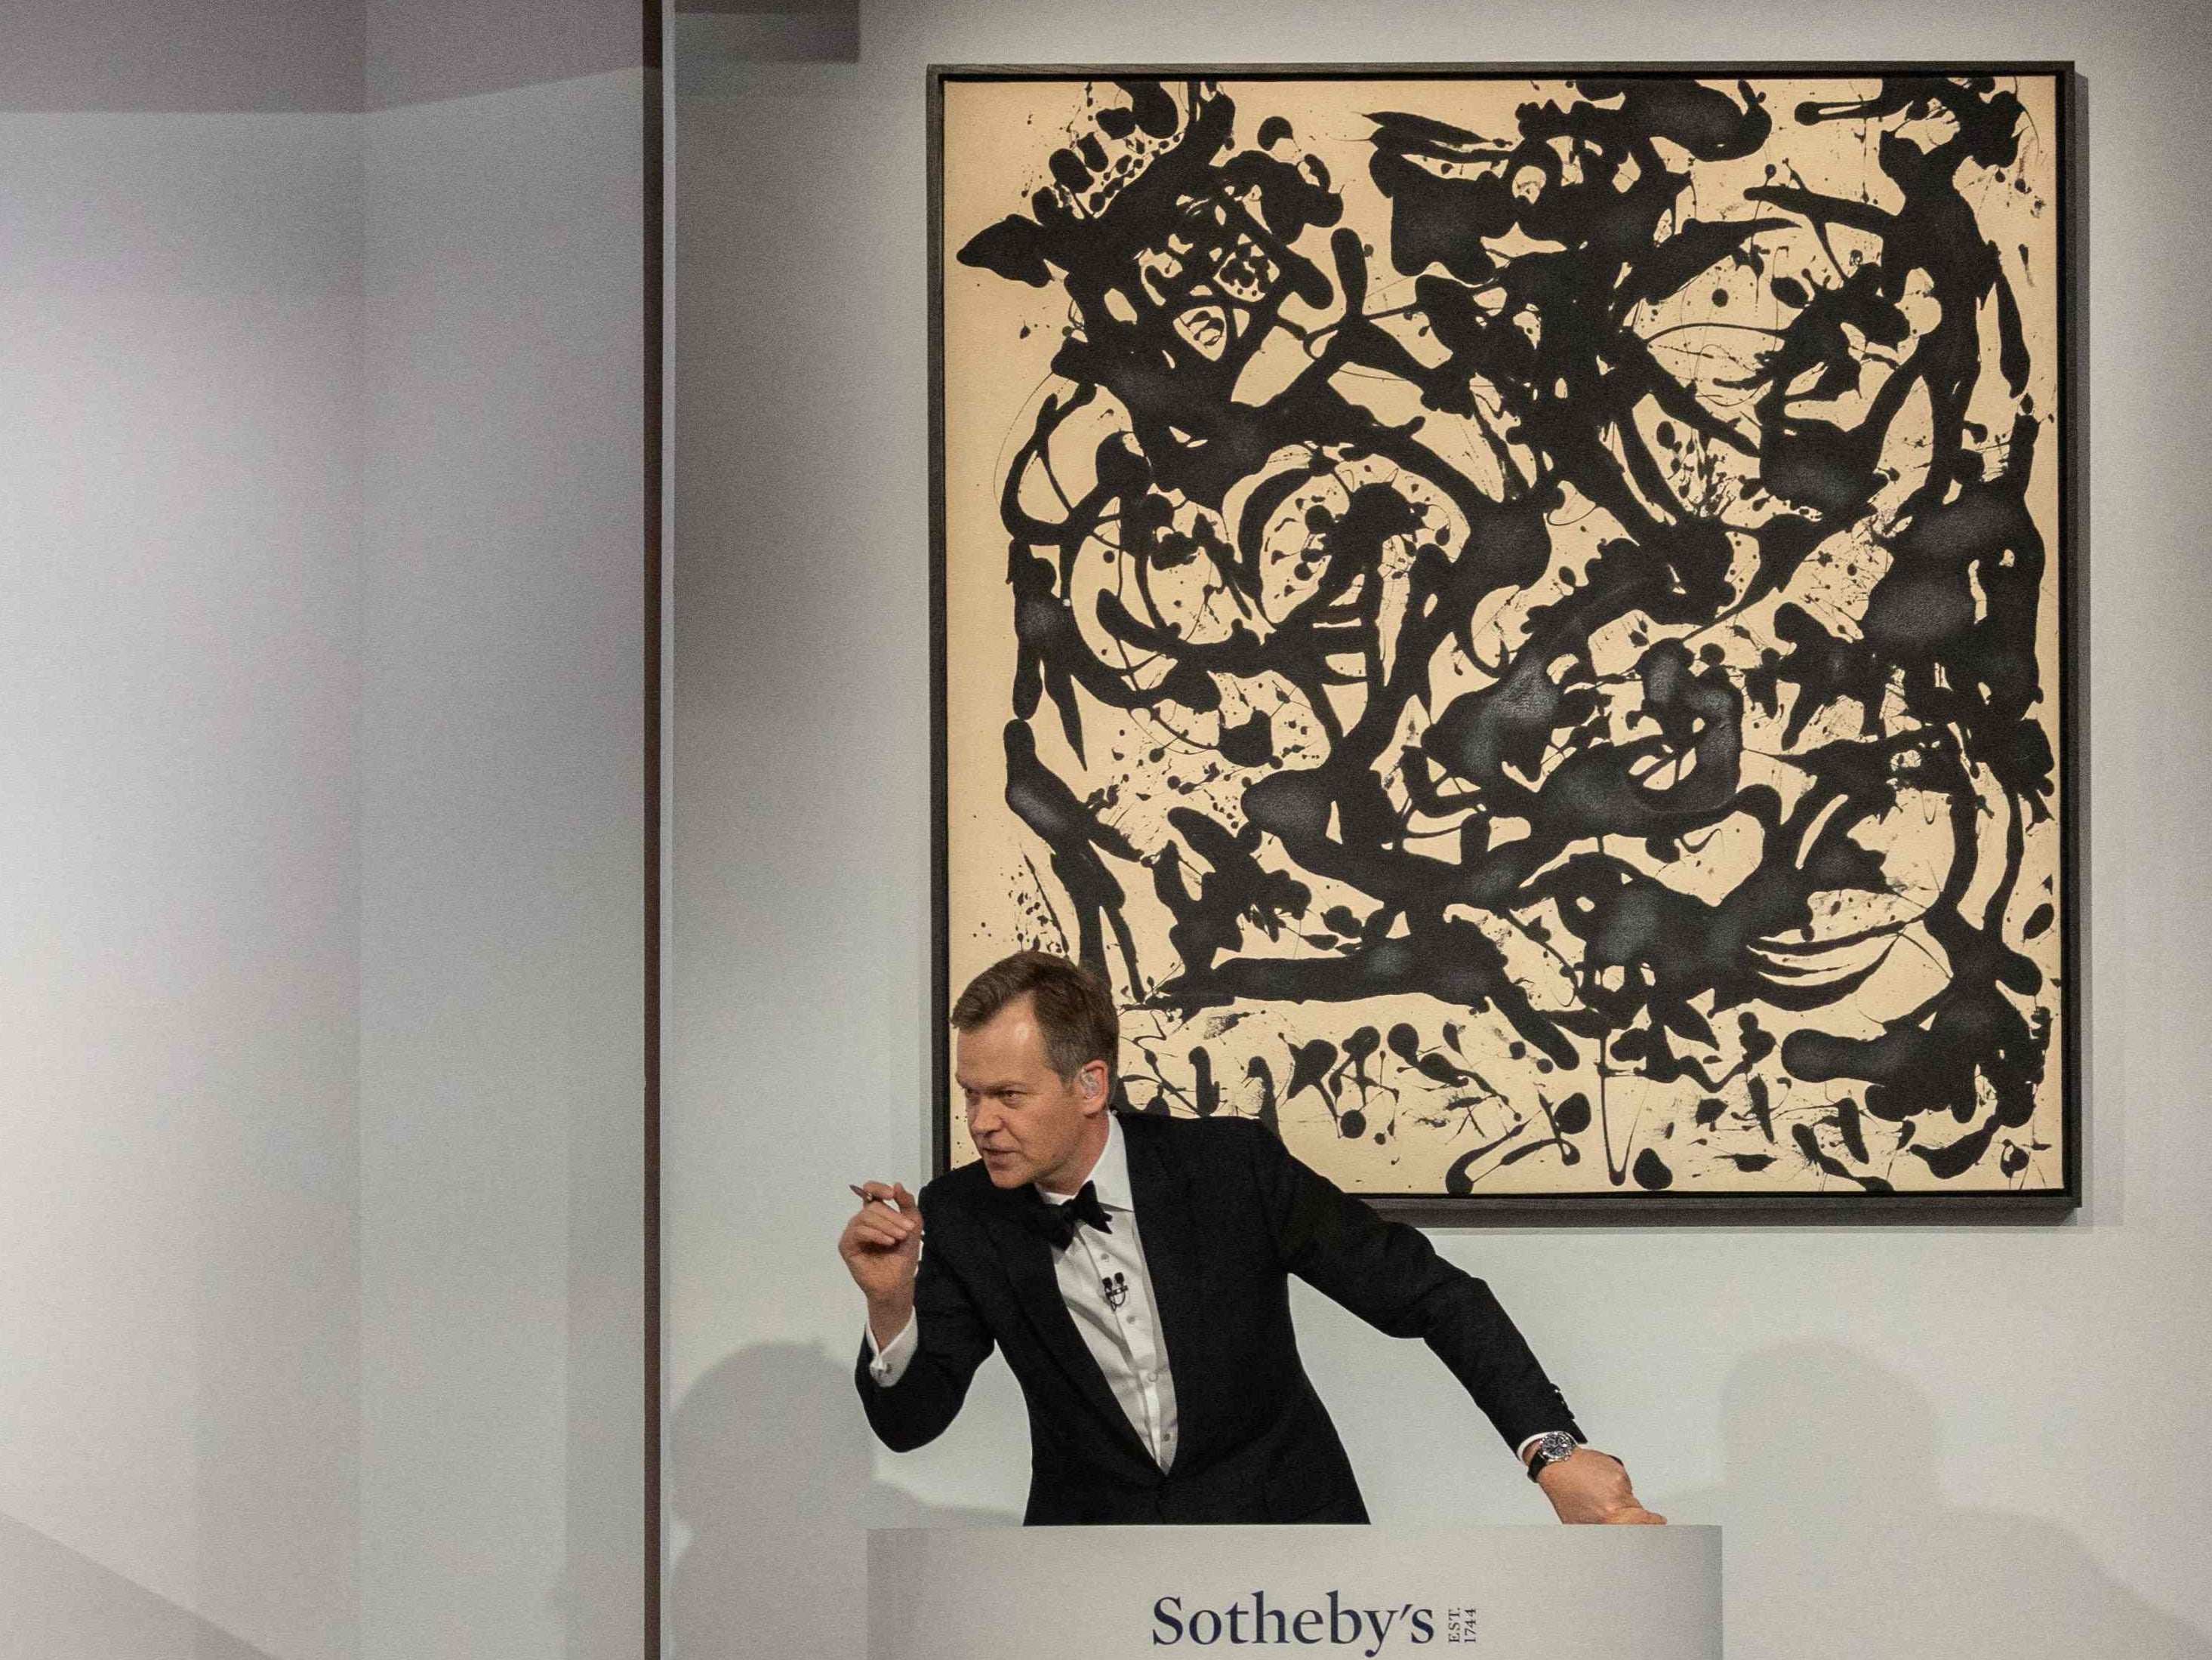 Sotheby’s auctioneer Oliver Barker leads an auction of the Macklowe Collection alongside Robert Ryman’s ‘Untitled’ in New York, 15 November, 2021